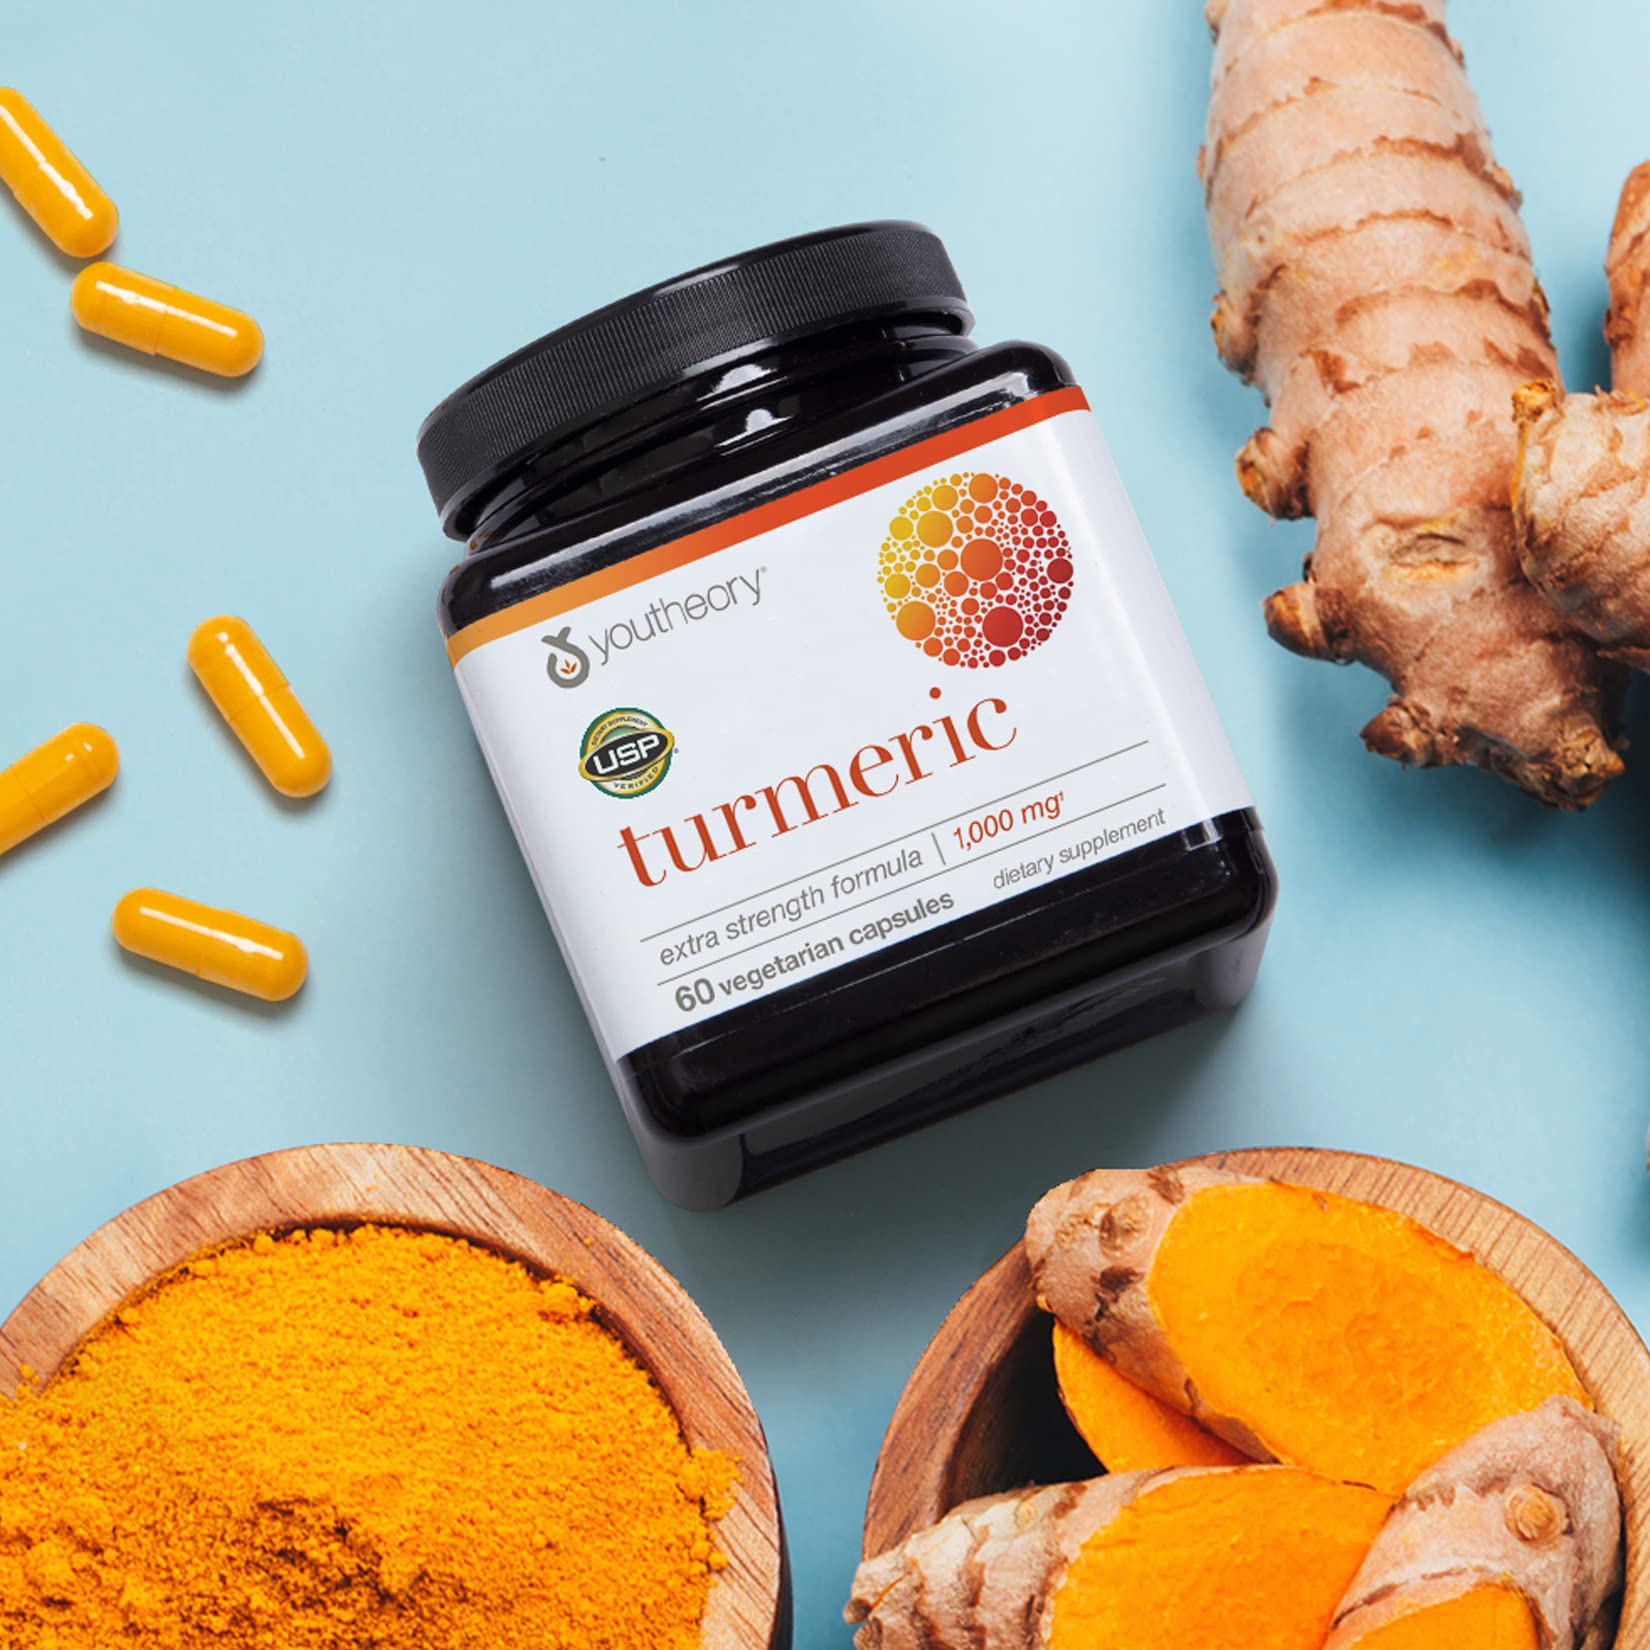 Youtheory Turmeric Curcumin Supplement with Black Pepper BioPerine, Powerful Antioxidant Properties for Joint & Healthy Inflammation Support, 60 Capsules